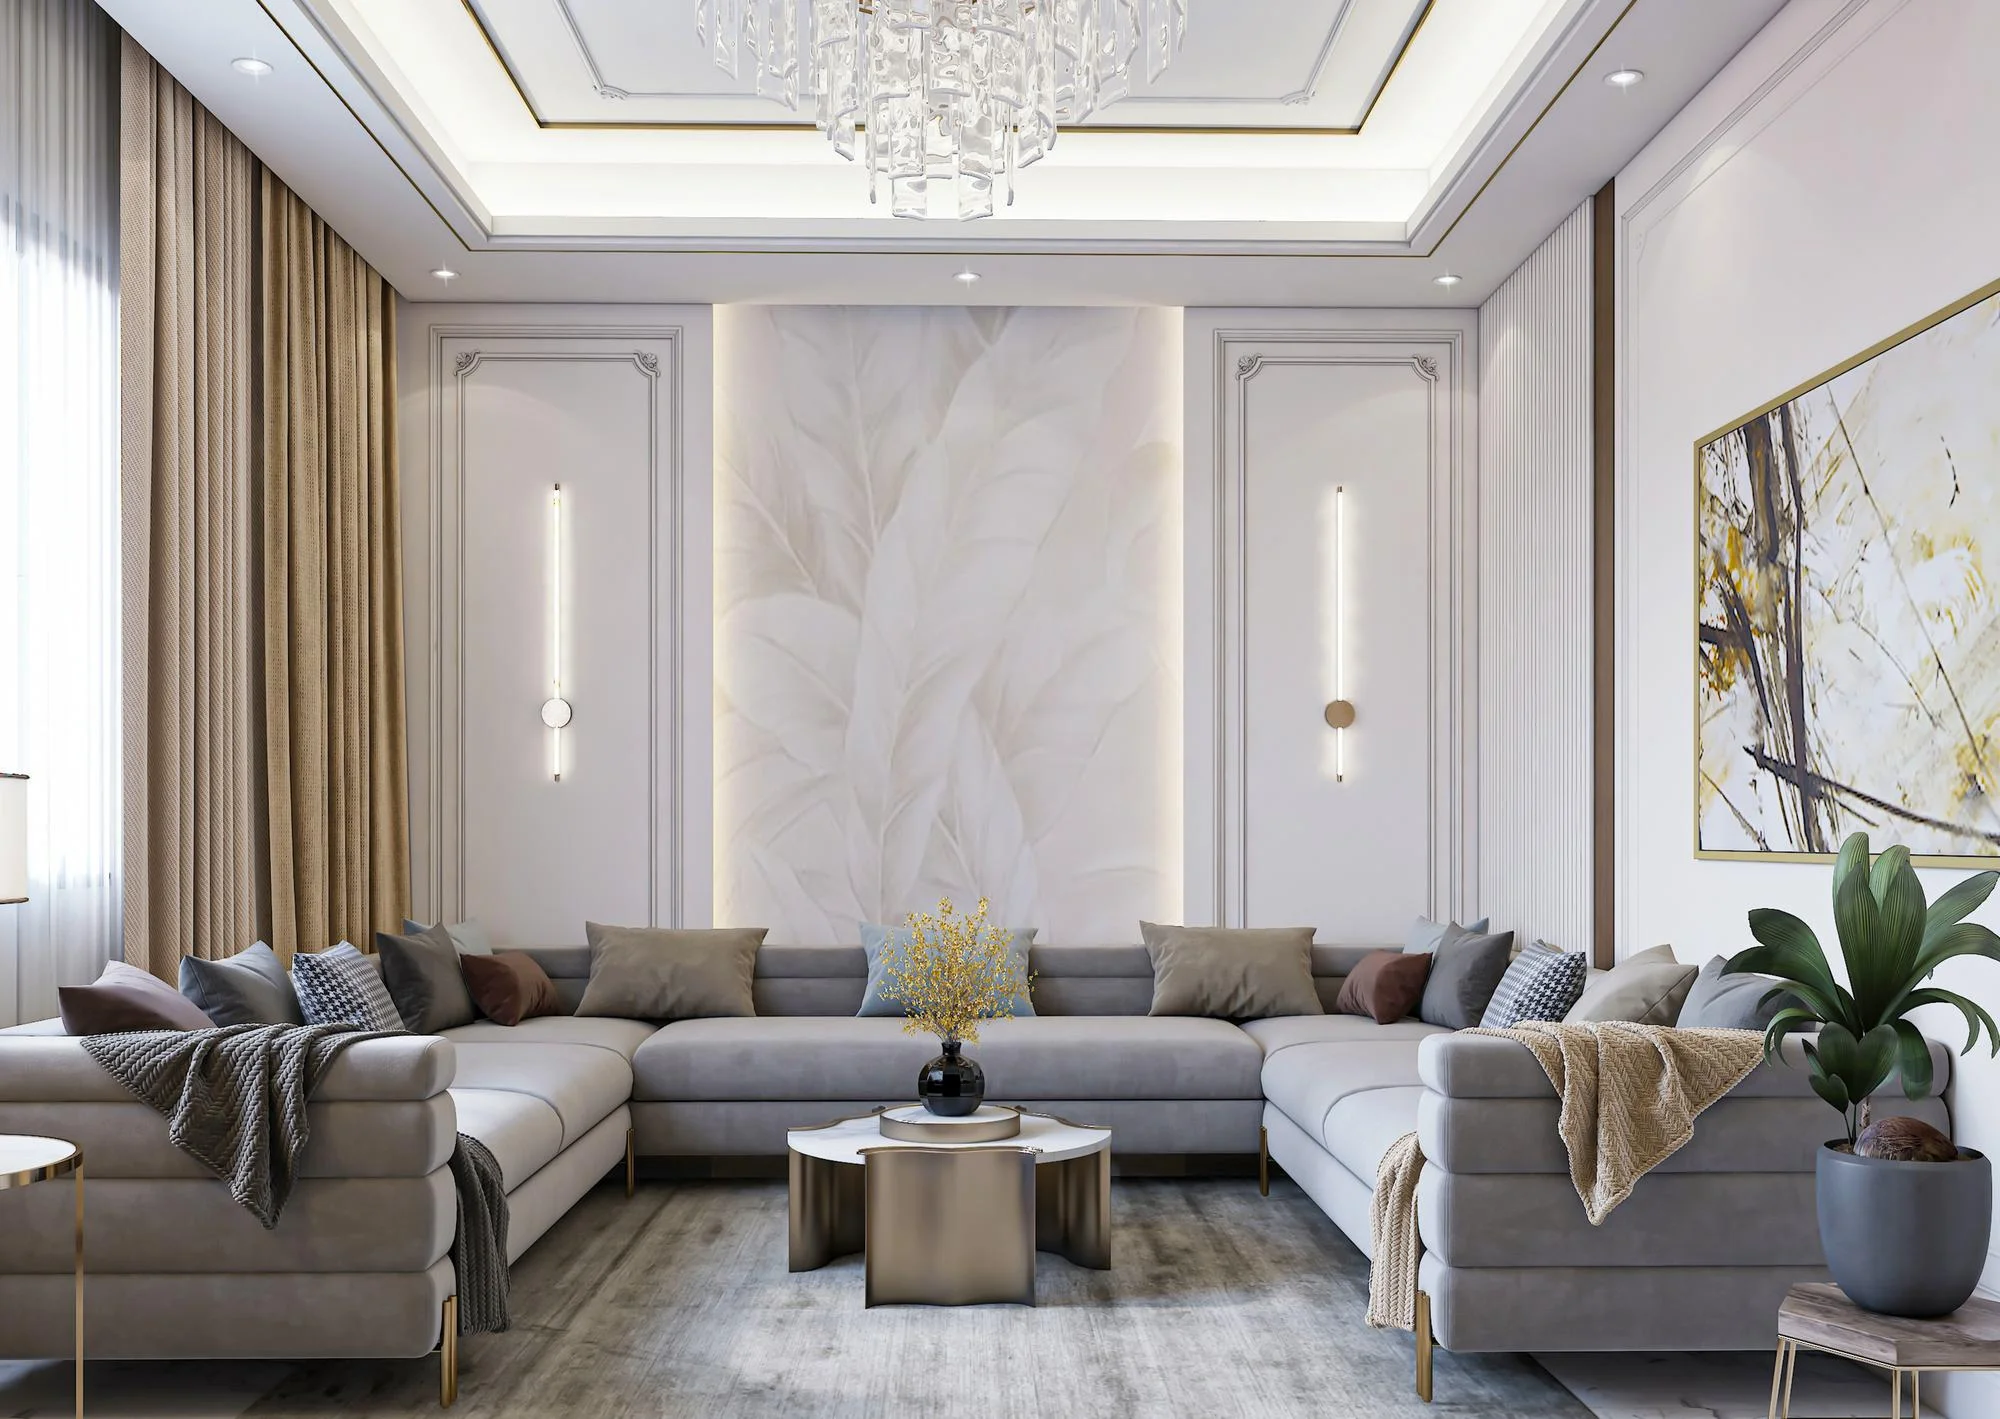 Luxurious residential interior design of a living room